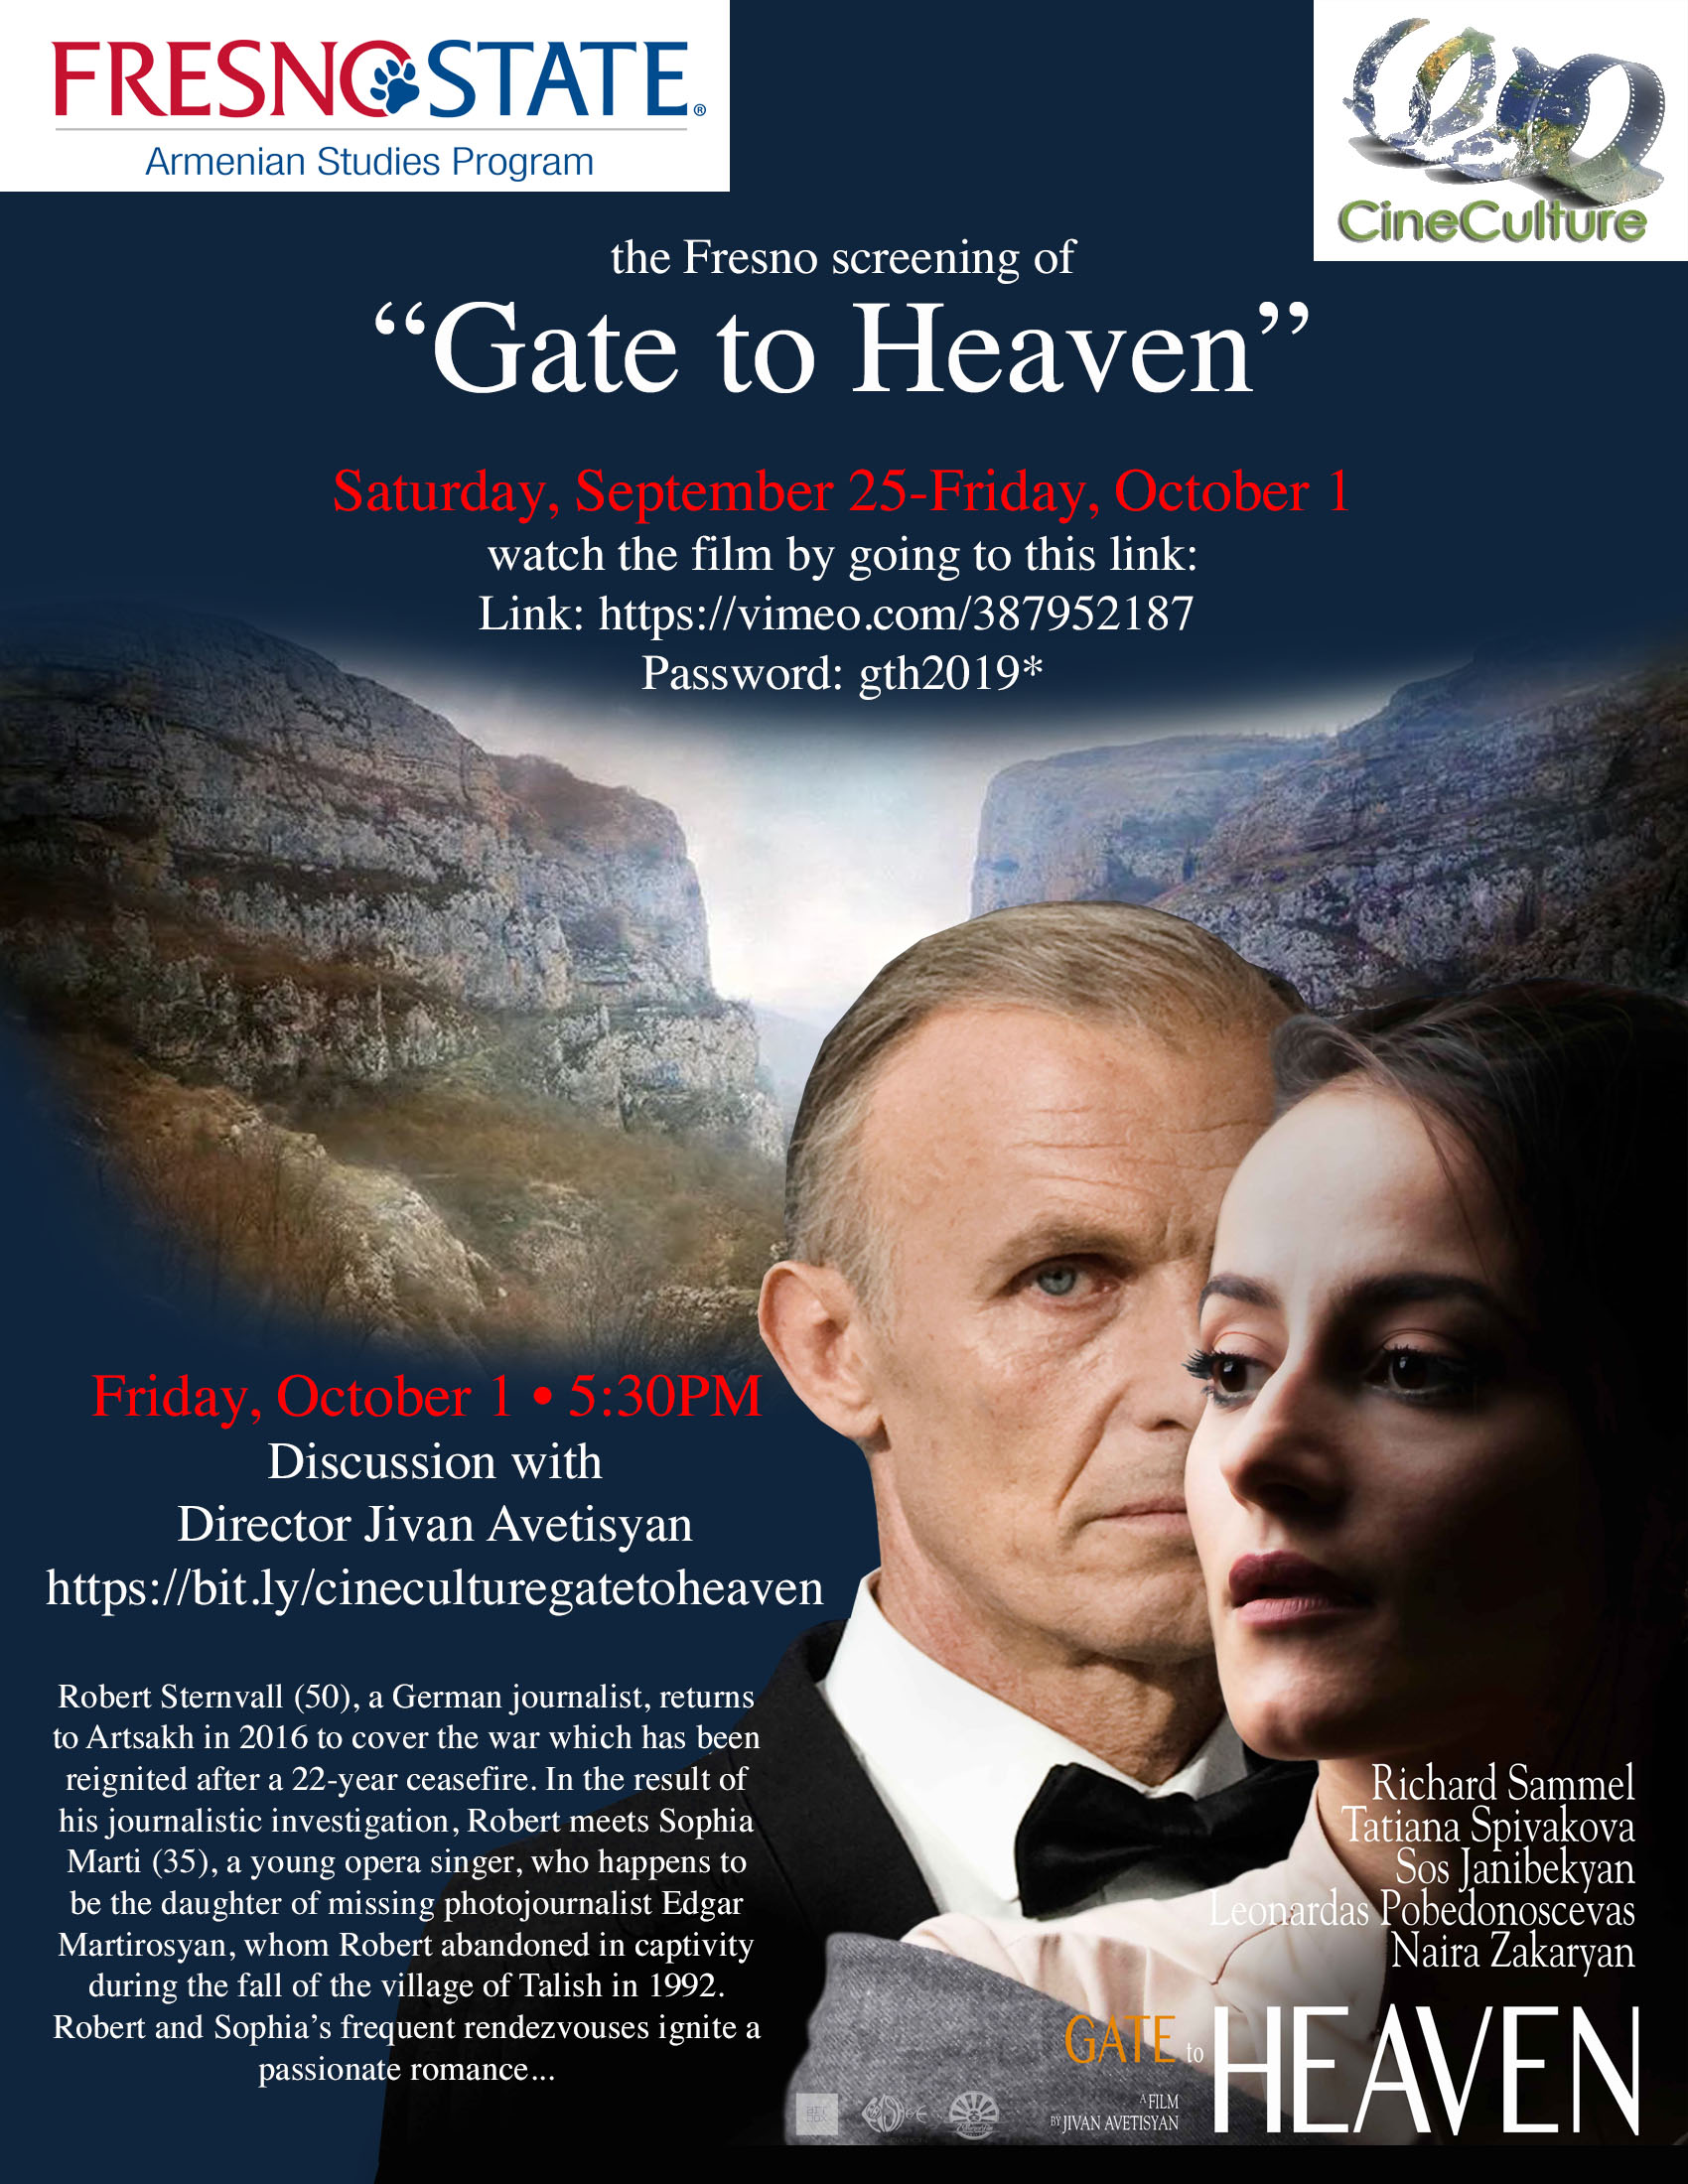 gate-to-heaven-cineculture